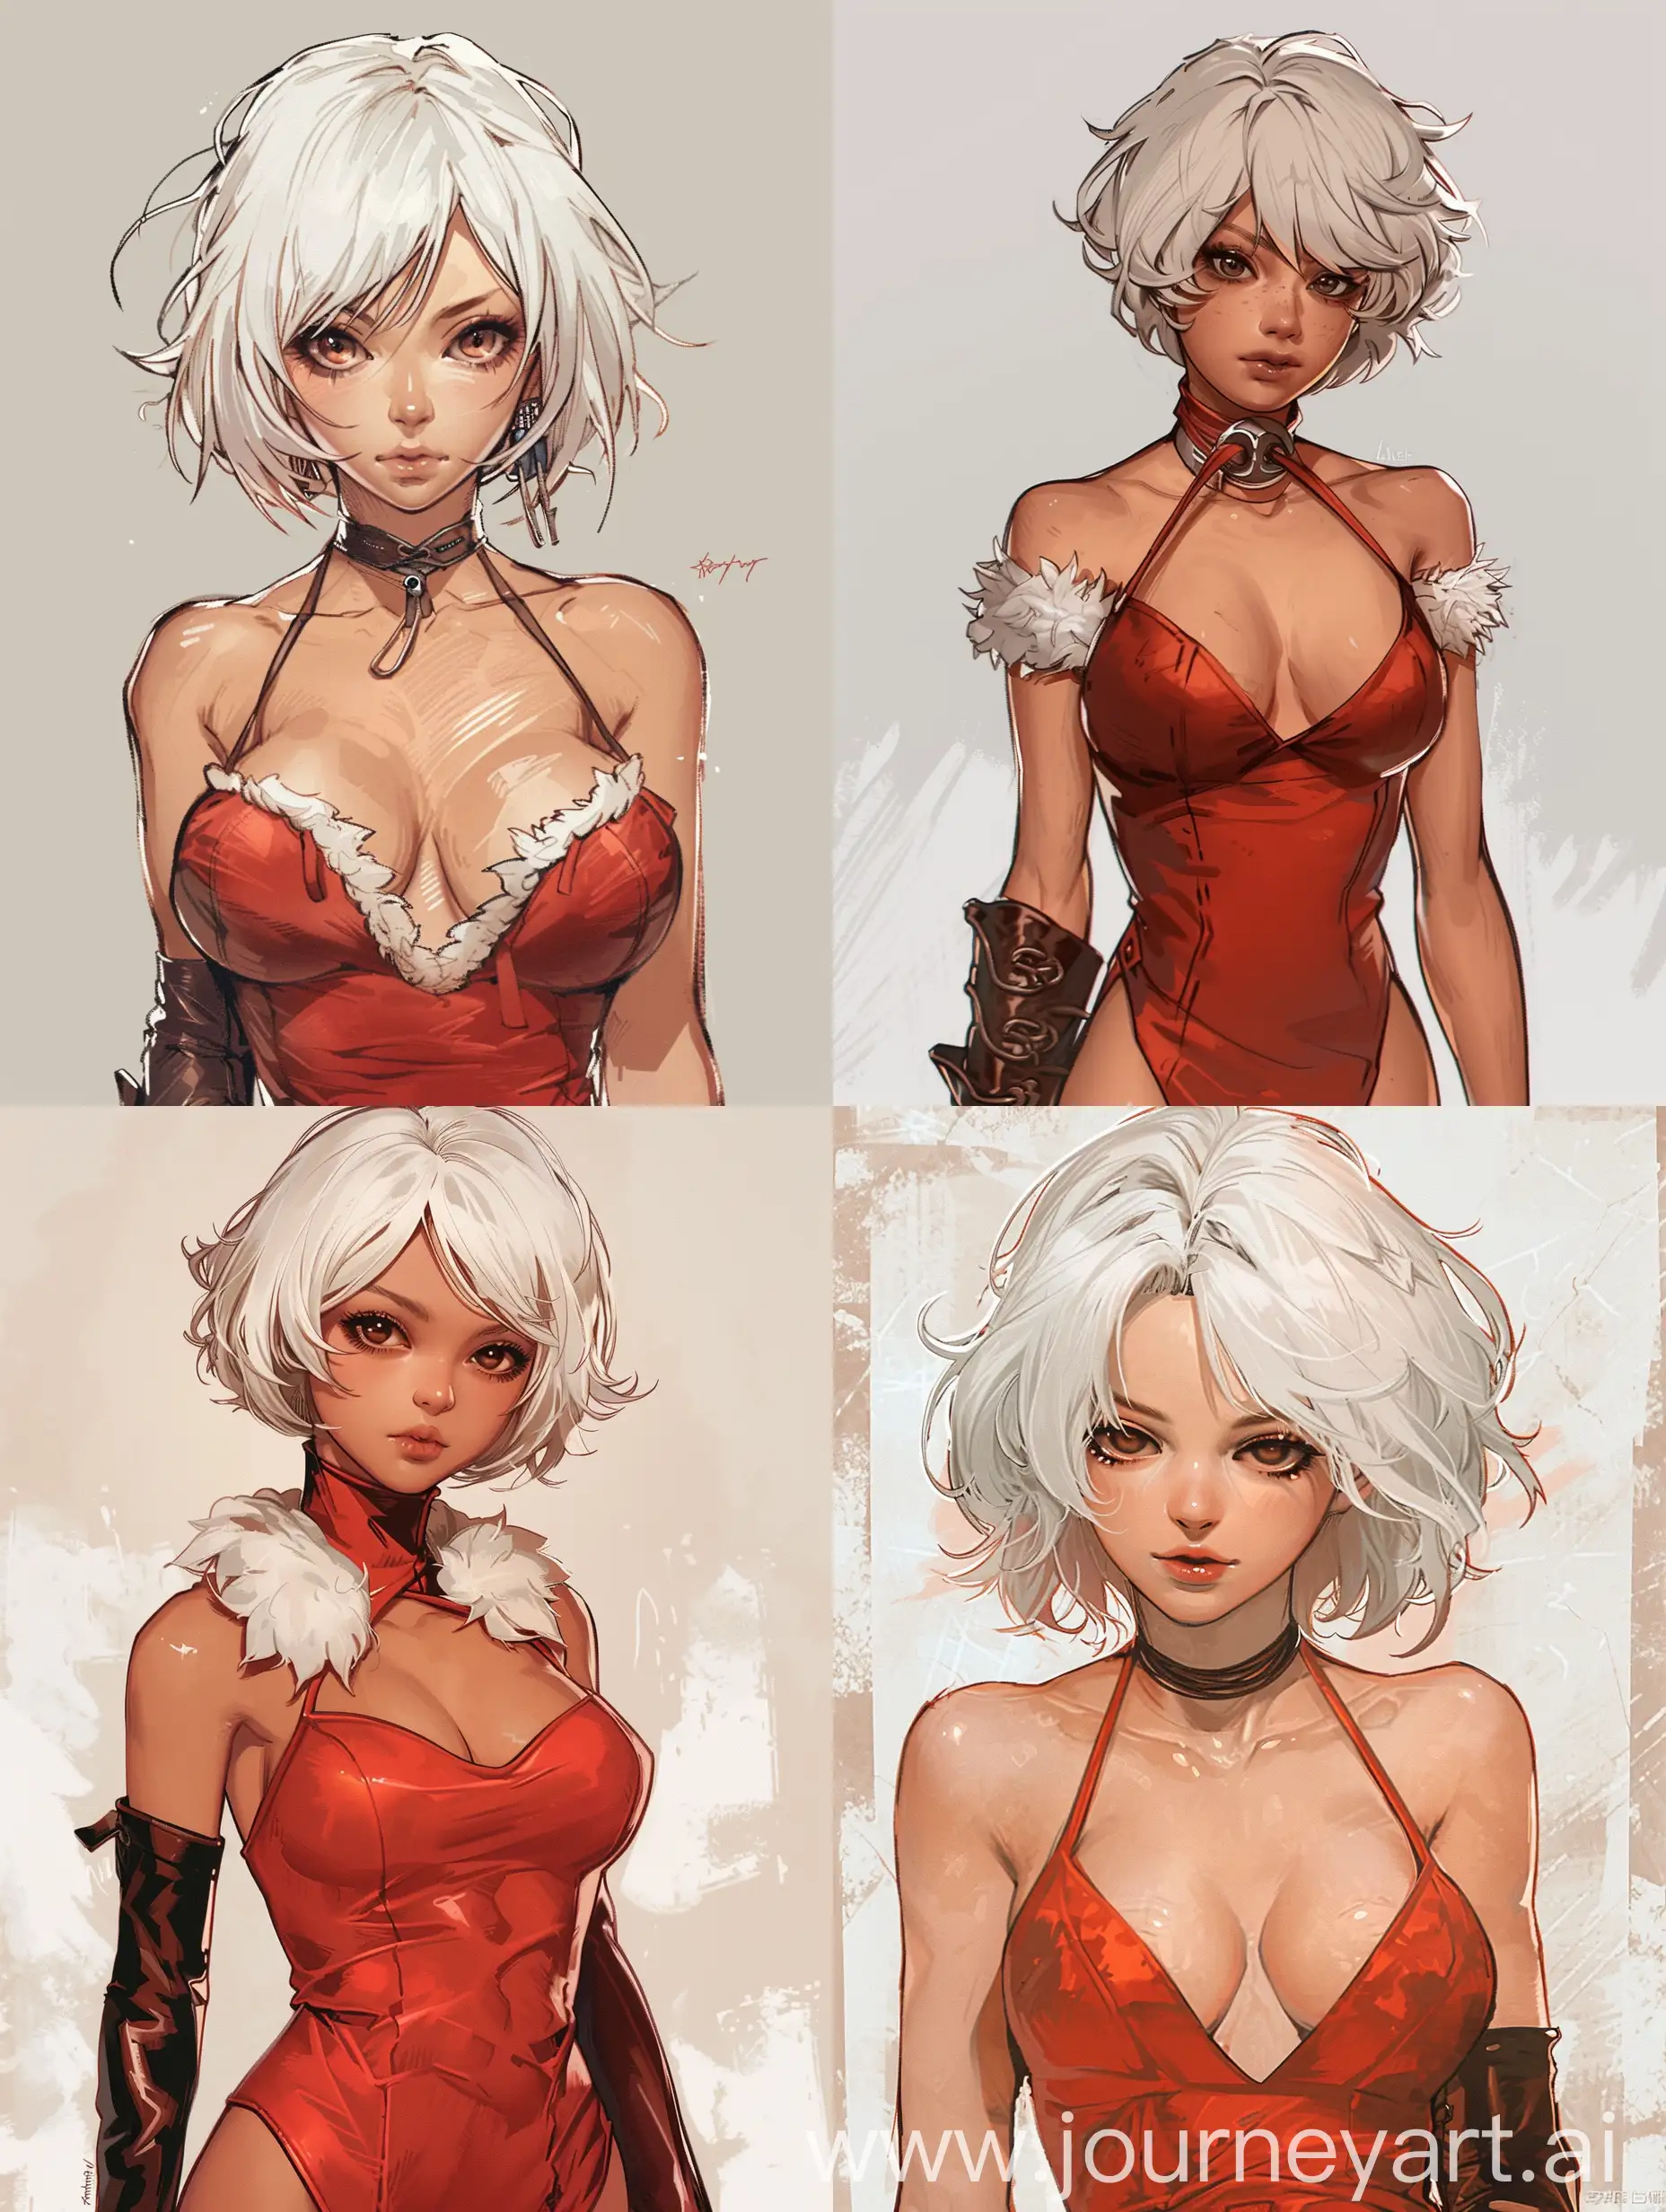 Anime-Style-Woman-in-Red-Party-Dress-with-White-Hair-and-Leather-Gloves